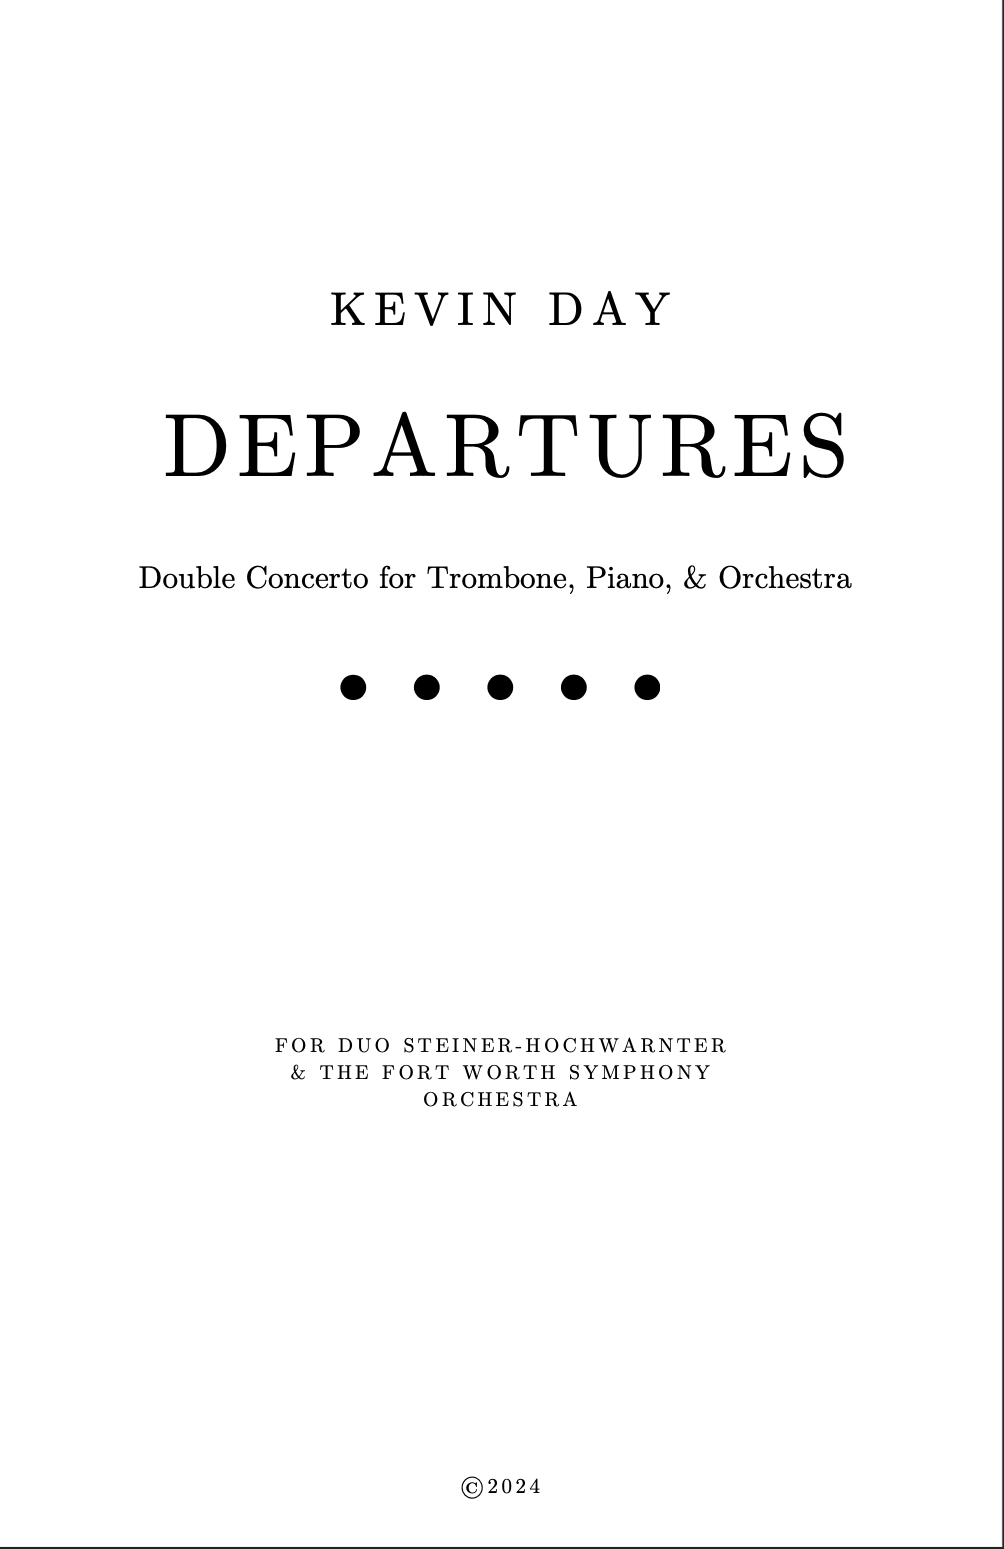 Departures (Trombone Solo Part) by Kevin Day